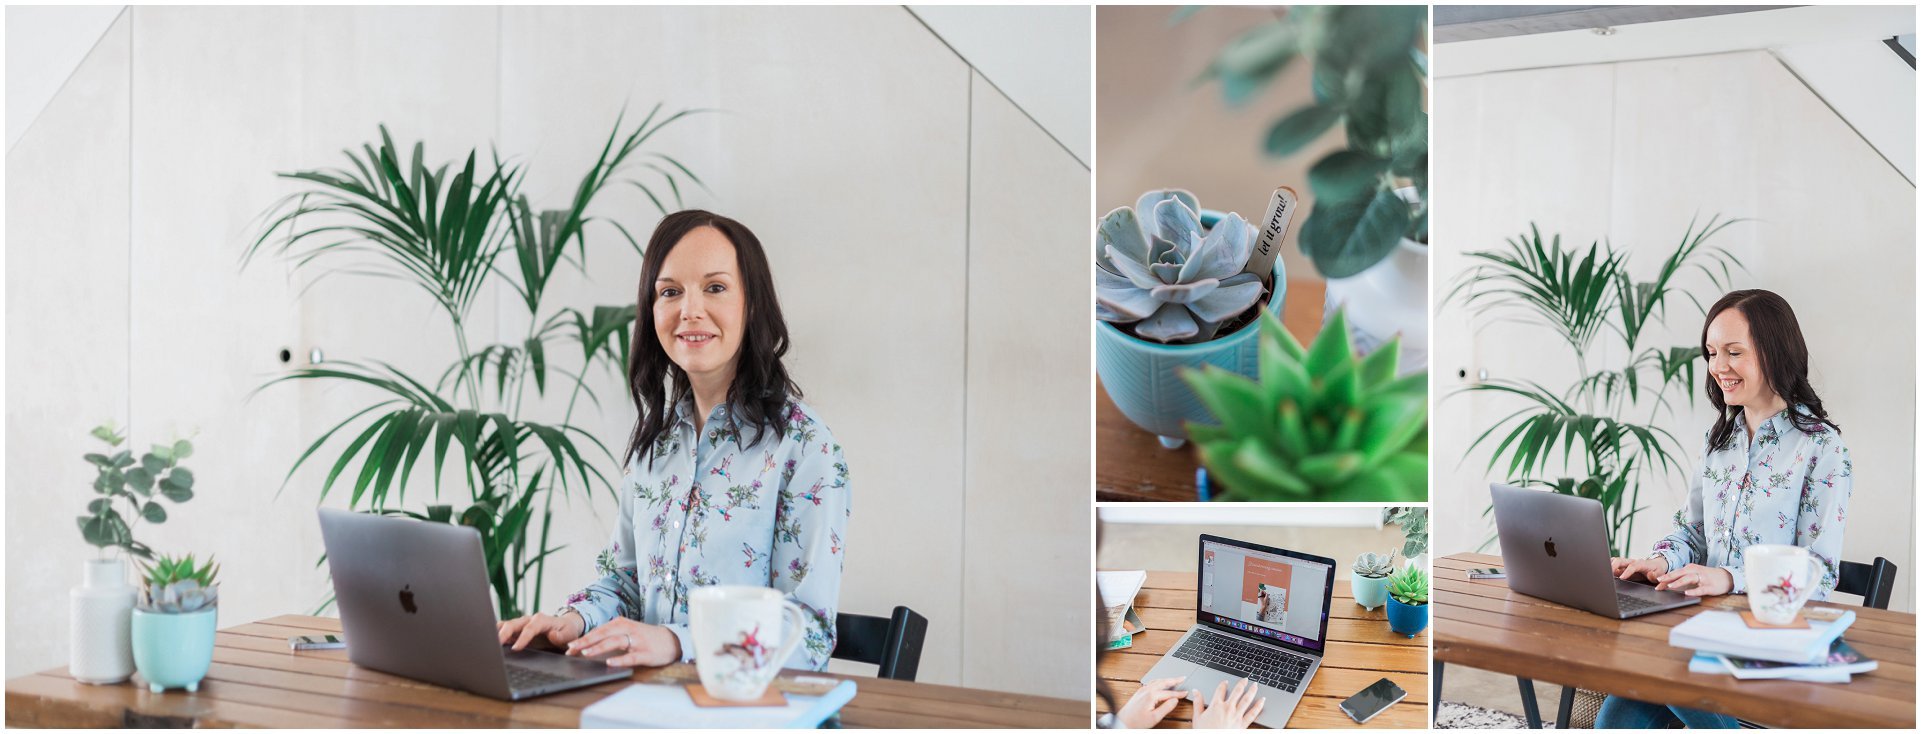 mini brand session with Erin Spurling at home with laptop, image by AKP Brand Photographer AKP Branding Stories